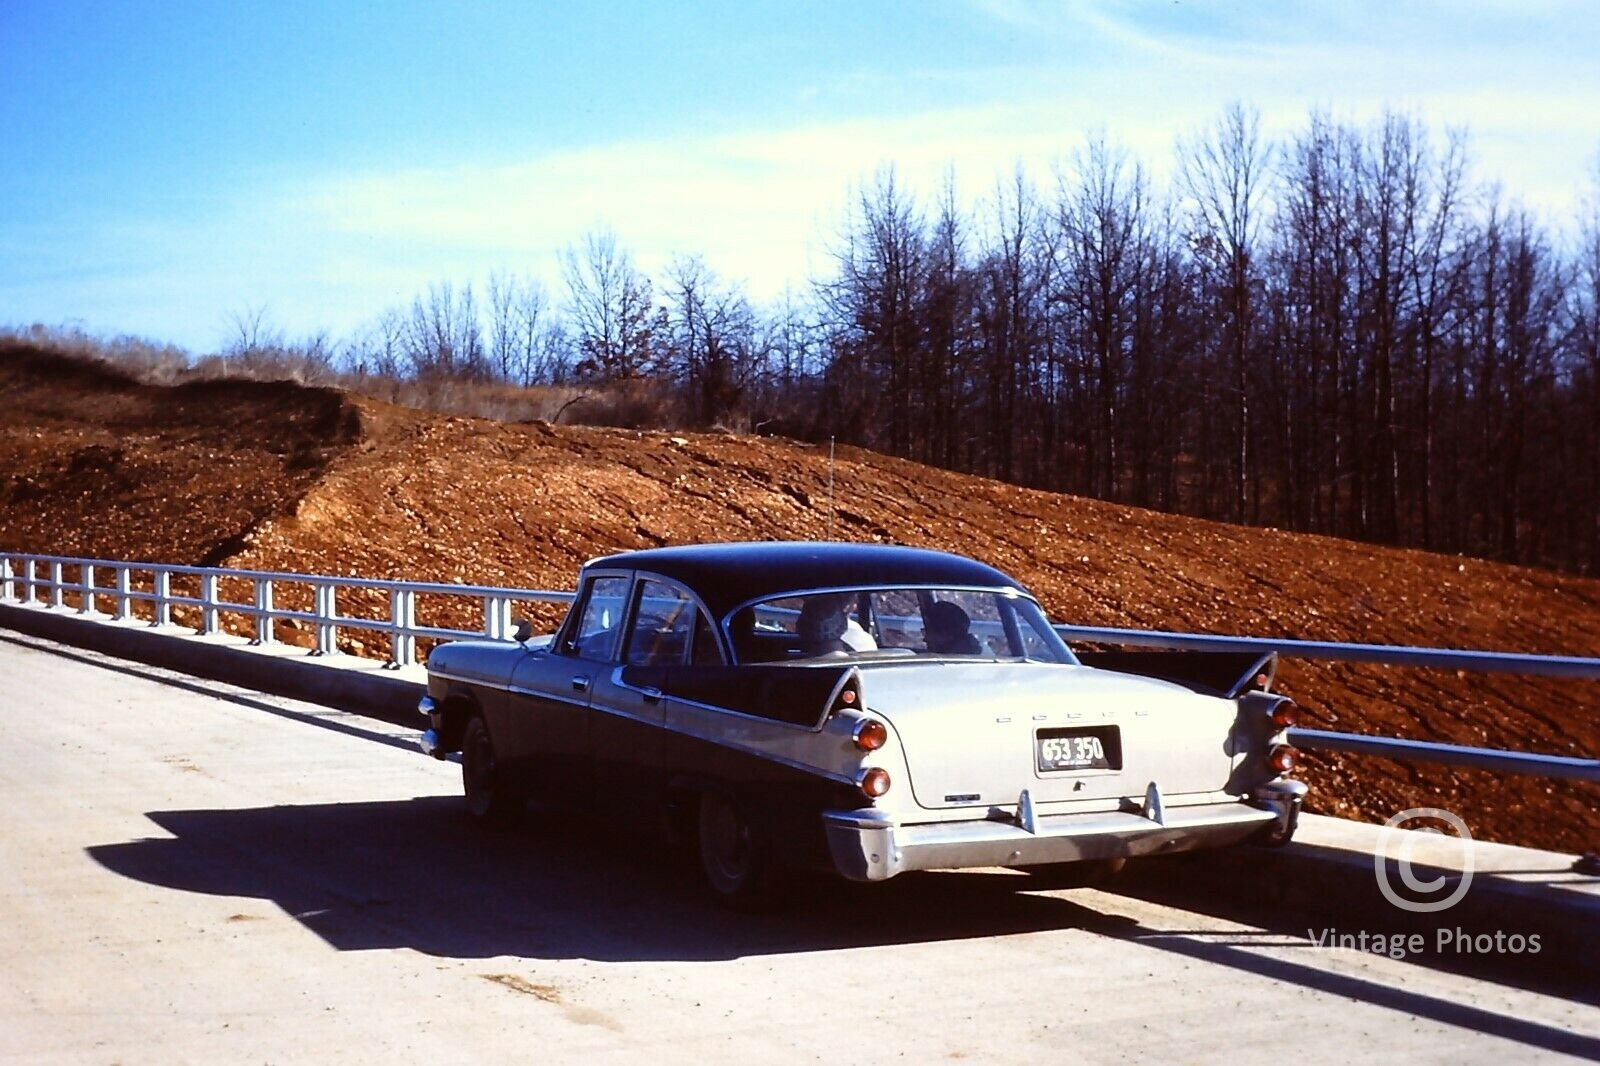 1960s American Classic Dodge Car Parked on Roadside